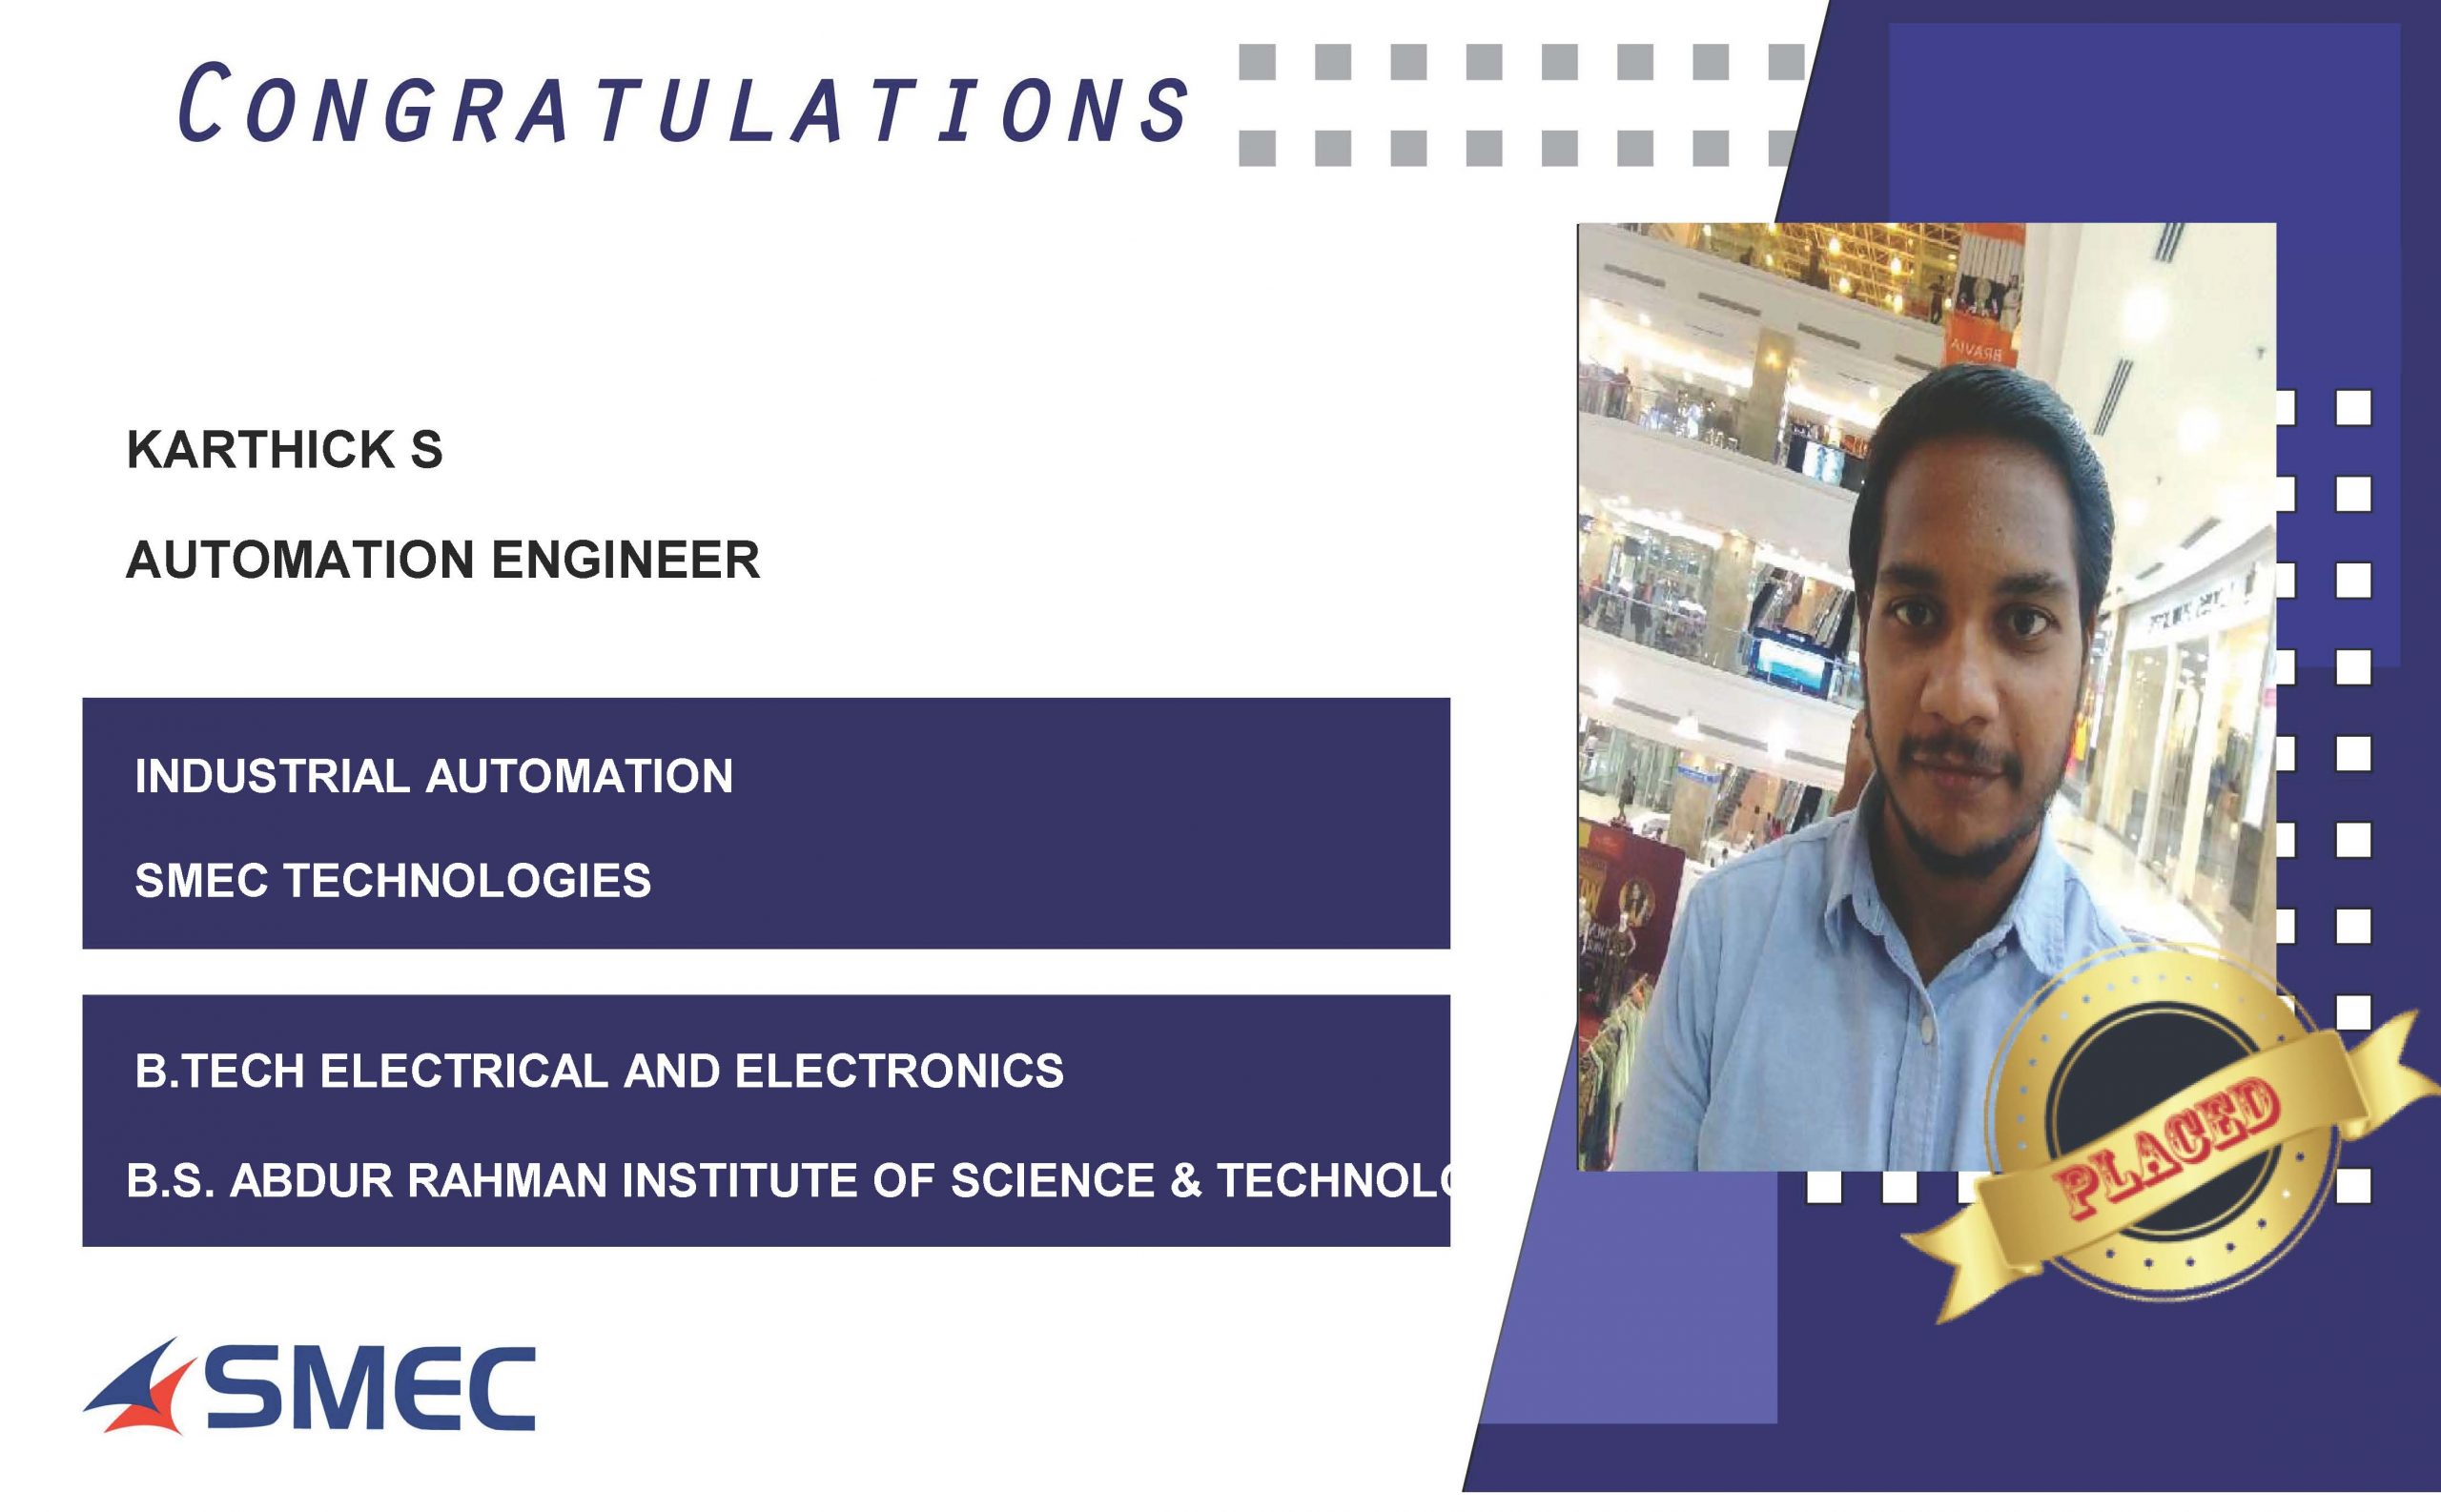 Karthick S Placed Successfully as Automation Engineer